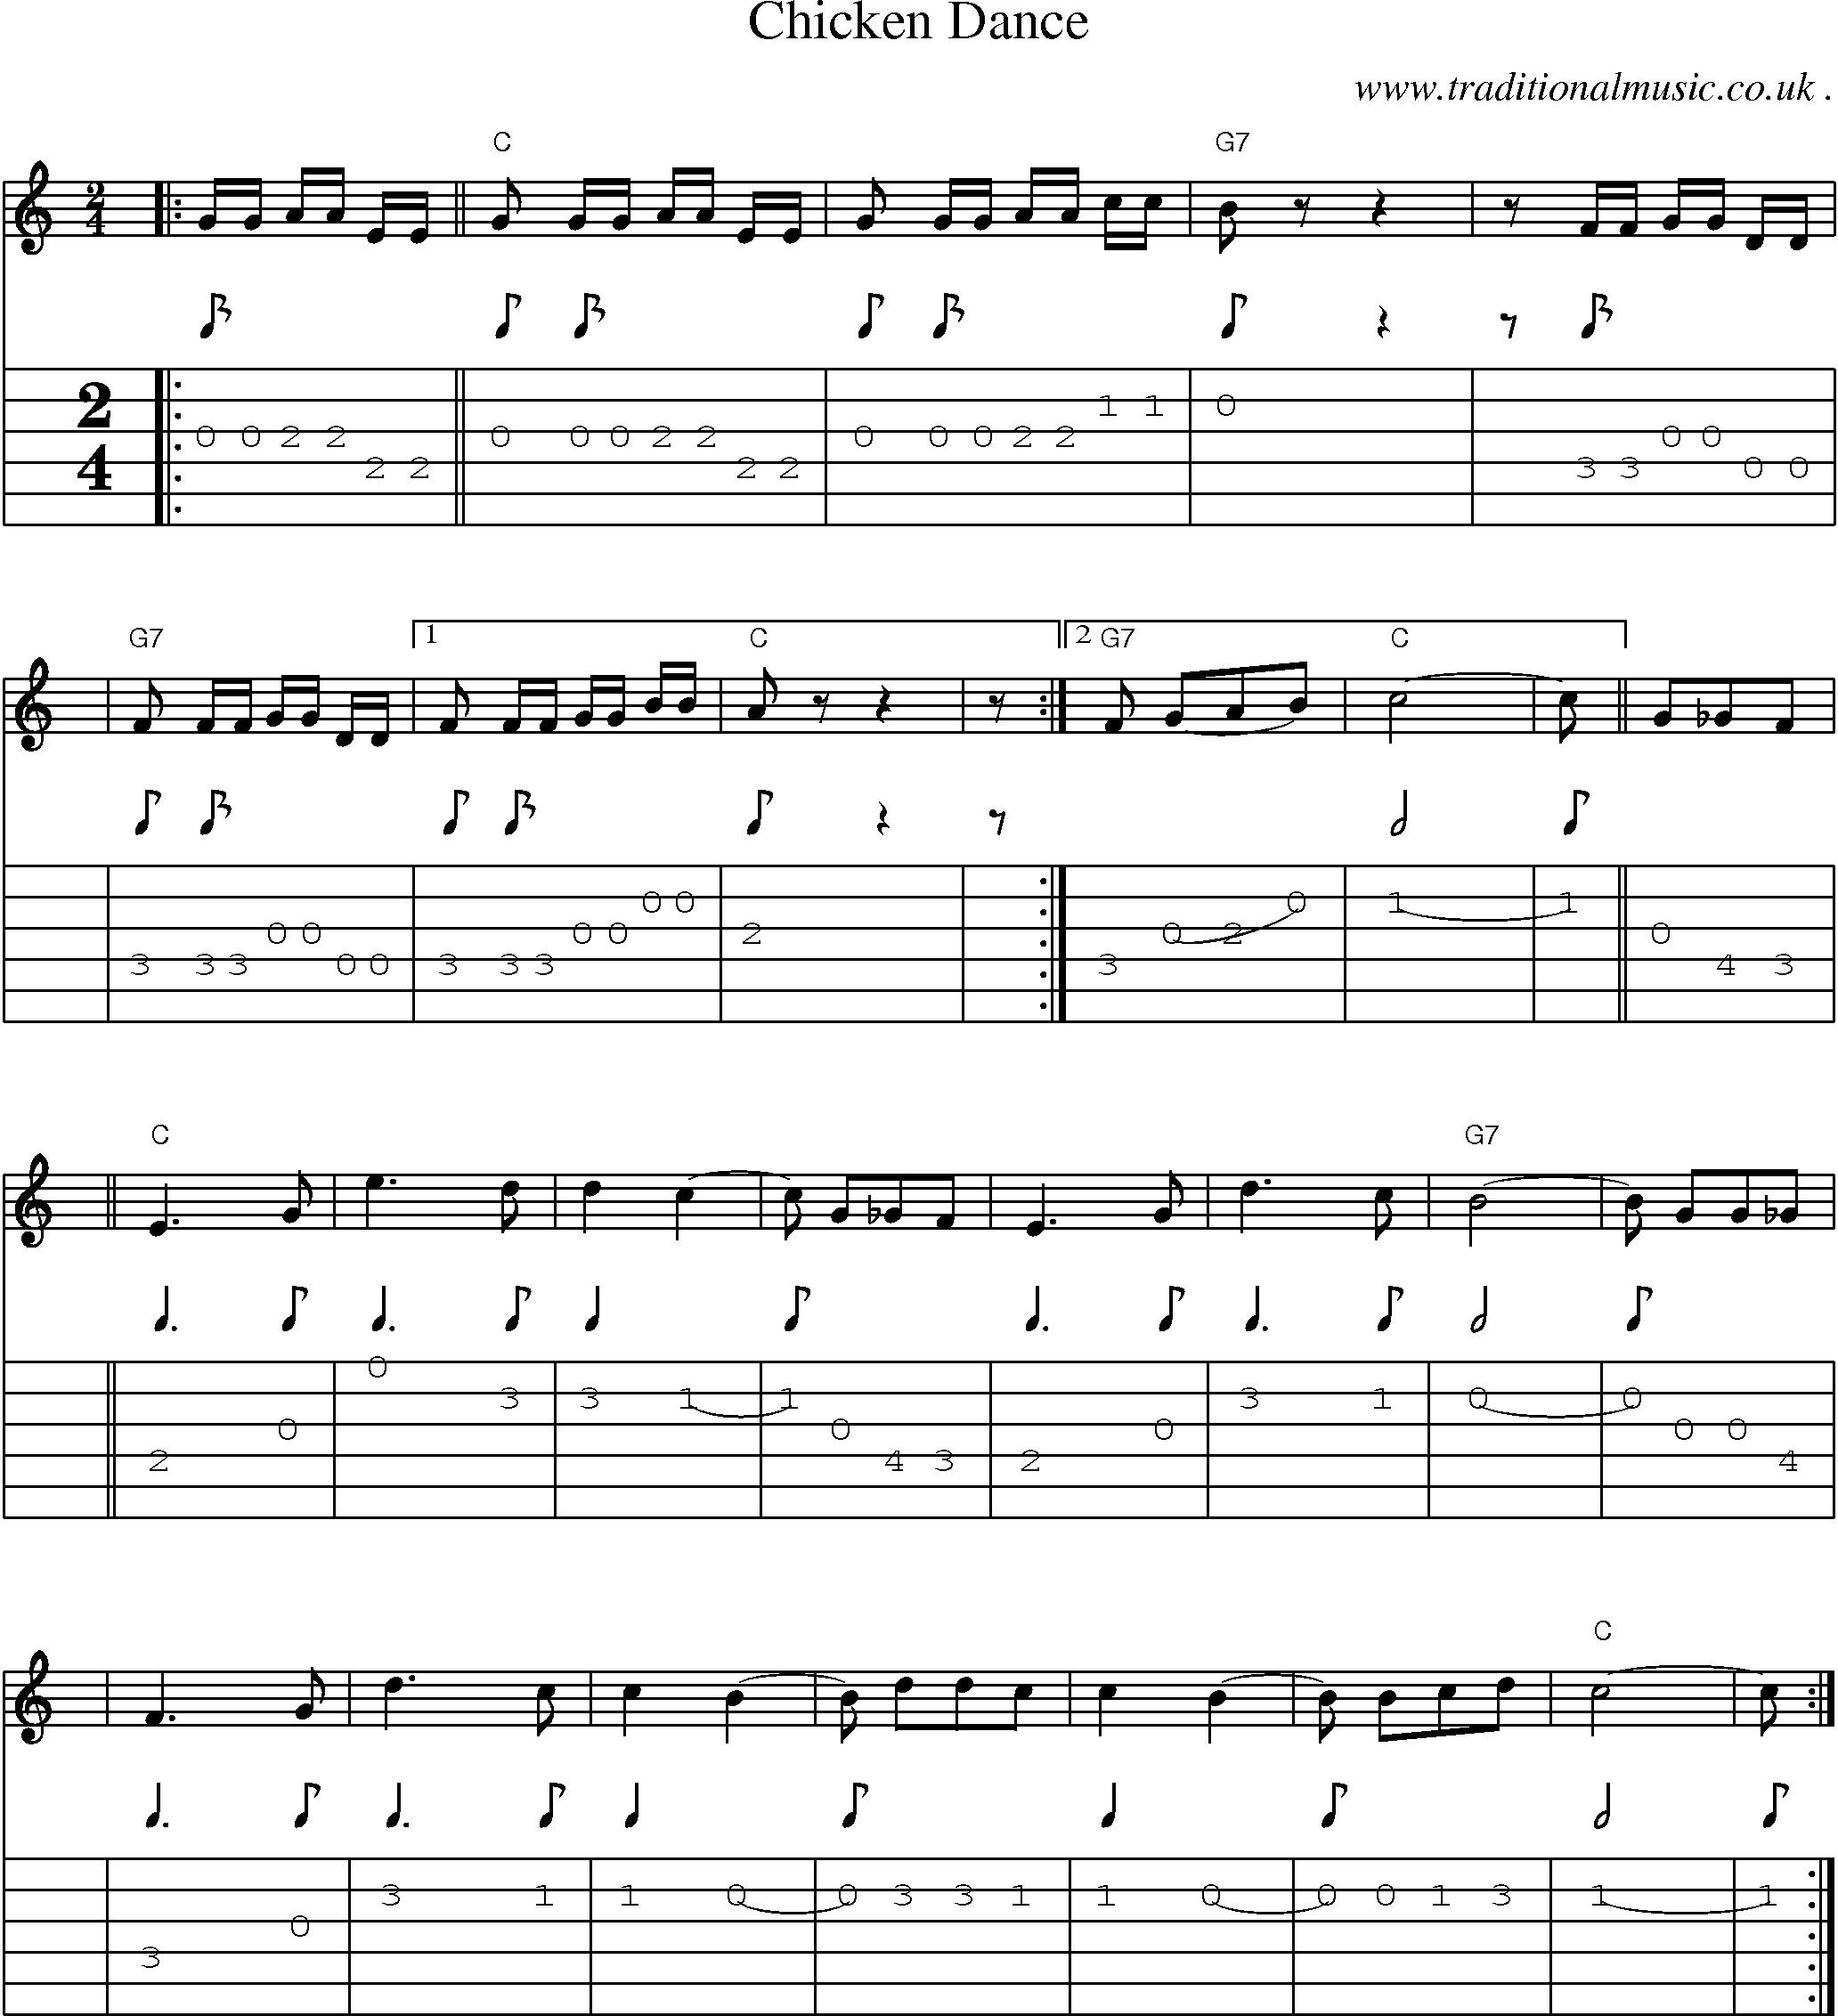 Music Score and Guitar Tabs for Chicken Dance